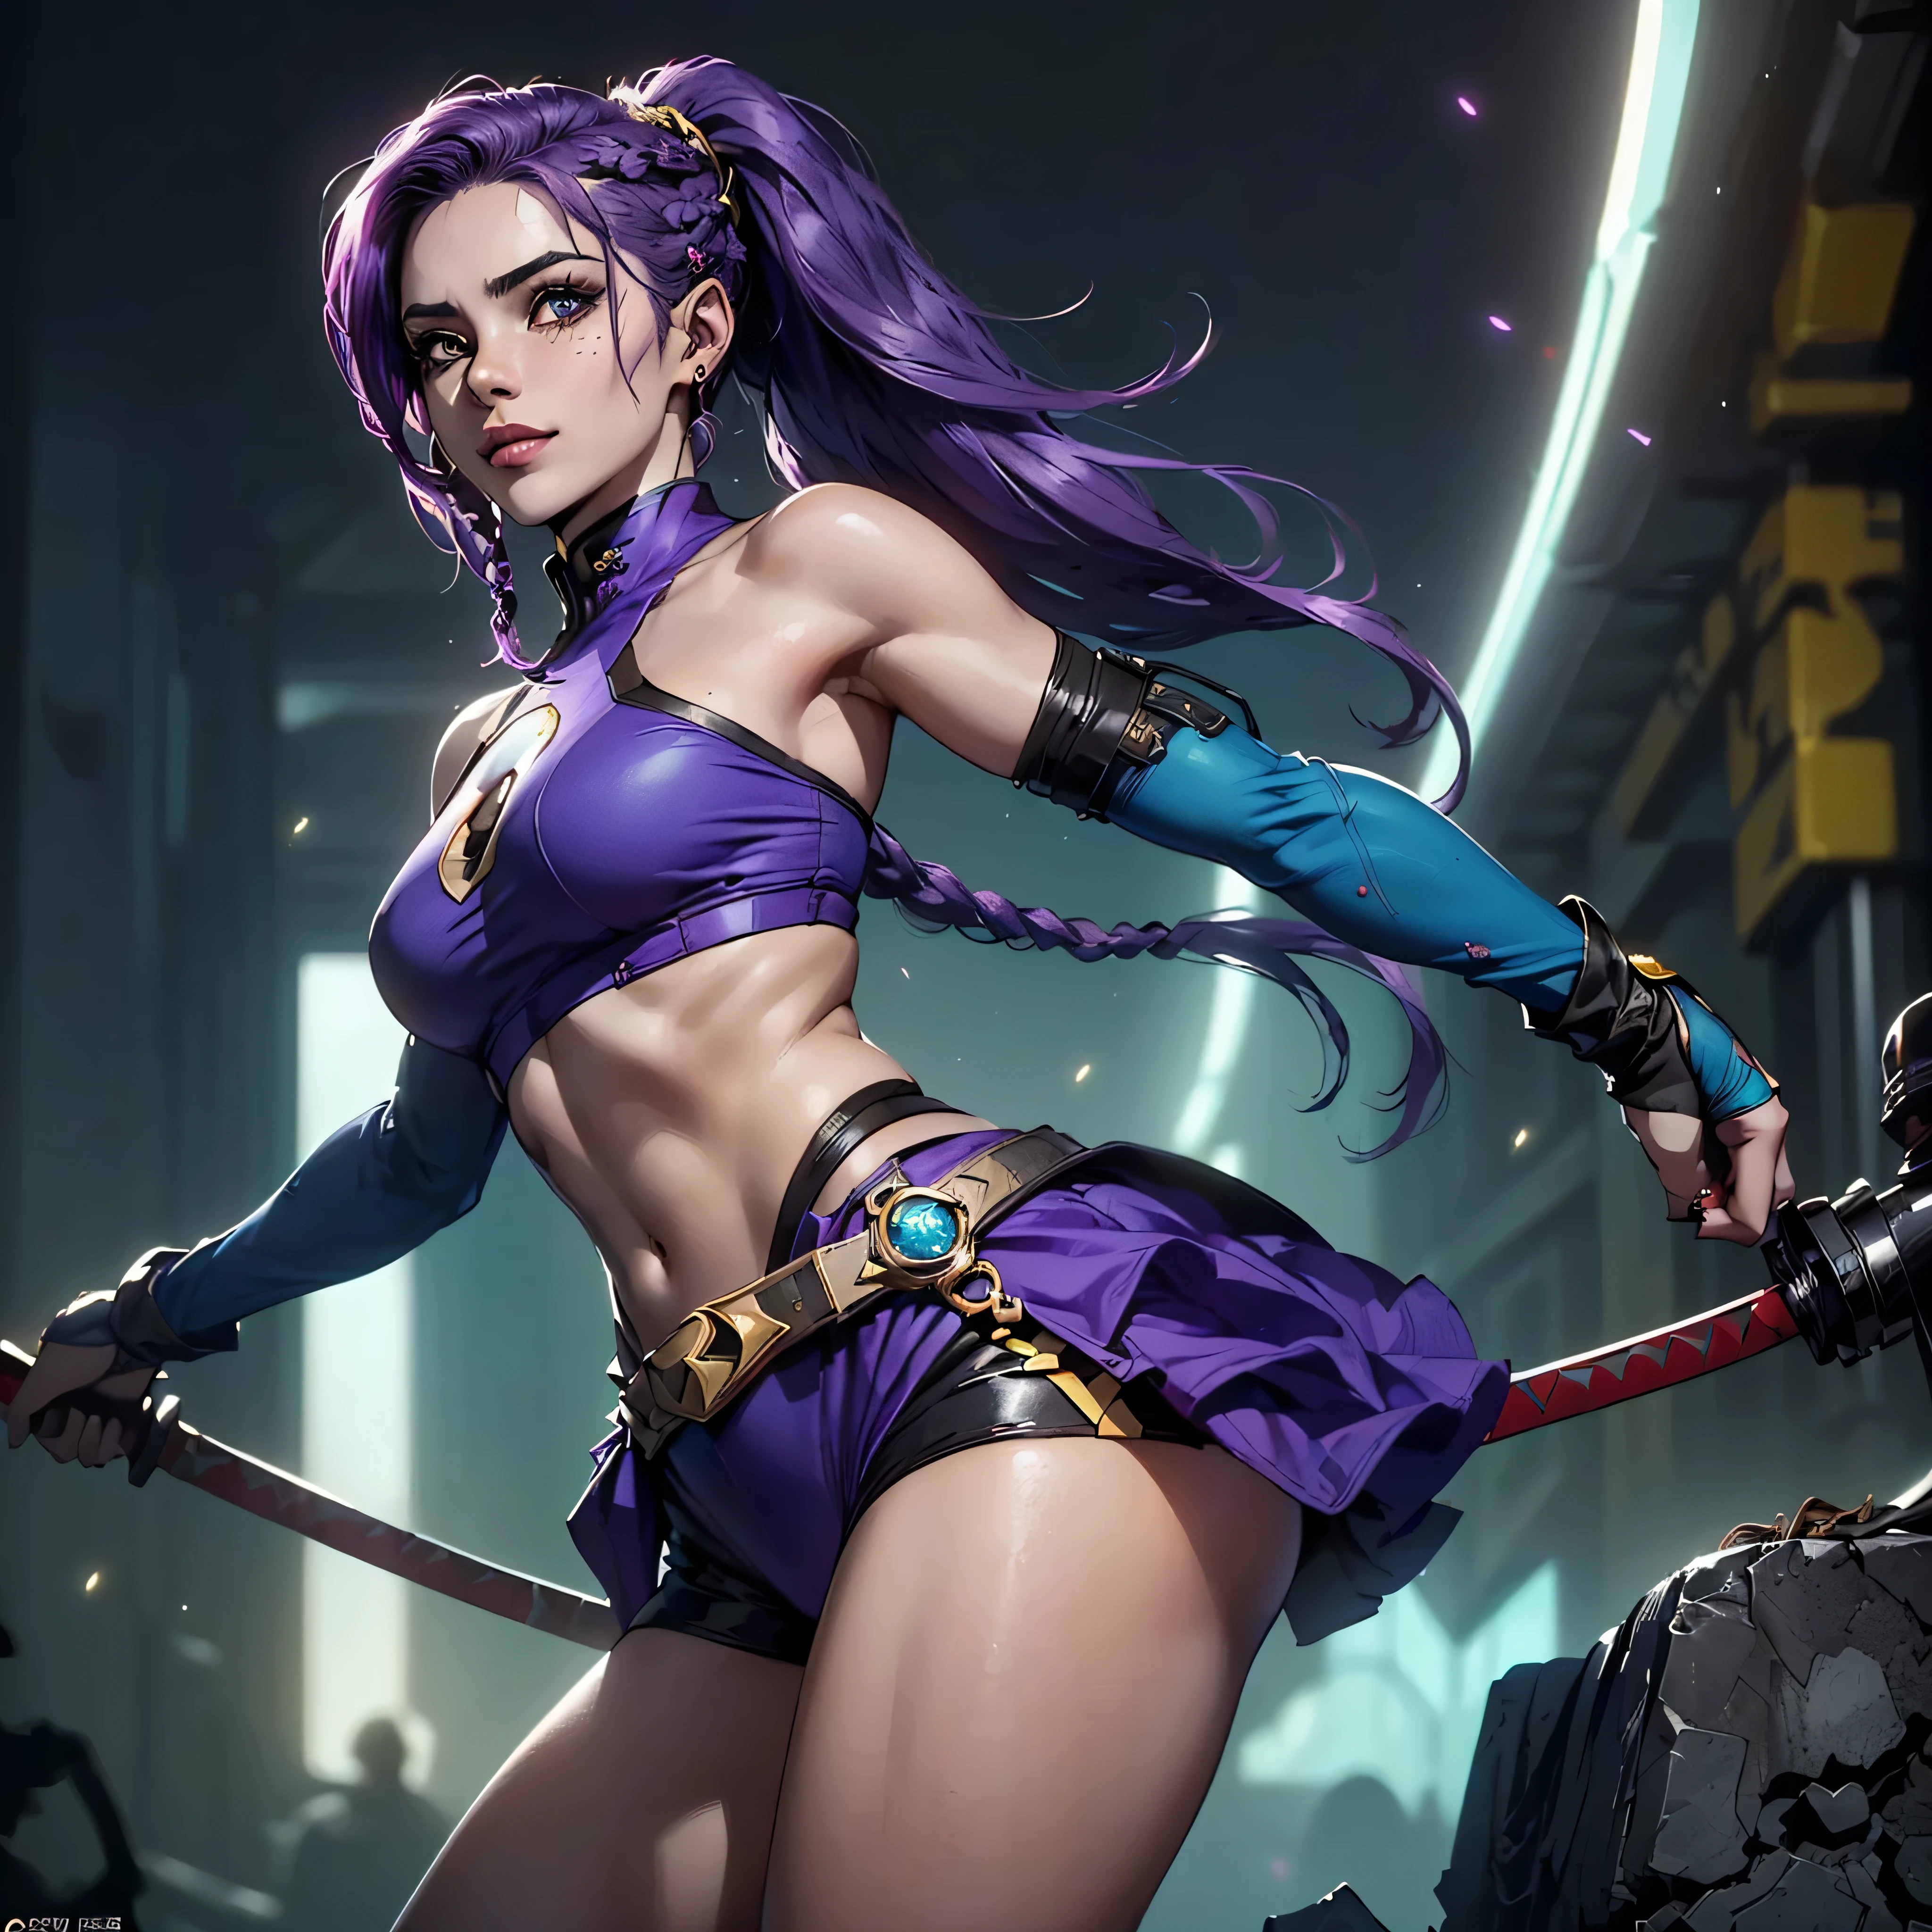 (((1girl))), ((beautiful girl with fluffy pink hair)), (breasts big:1.4),Sagging , ((A woman with purple hair and ponytail braid in a superhero pose)), gil elvgren style, WLOP, artgerm (((A 25-year-old woman with purple hair and ponytail braid wearing an all-purple hero outfit with yellow accents in a dynamic pose))) ((Black superhero costume)) ((Woman segurando uma espada Katana apontada para o espectador)) (((cerulean_Ojo:1.3))), Ojo intrincado, lindo Ojo detalhado, symetric eye)),(((hero uniform, standing alone, corpo fitness, color Art, third rule, dinamic pose, Woman, 1 of 25 years, smiling at the viewer, nblurry background, legs thick, Ojos azuis, SHE is in a fighting pose, RED RAYS ARE AROUND YOUR BODY, body fitness, breasts big, WLOP, artgerm, Lejia Chan, new china, Jeehyung Lee, Depth of field, detalhes intricate, subtle colors, Fantastic kingdom, extremely detaild, focus ultra sharp, light particles, attention to detail, vast open world, grandeur and admiration, cinemactic, Stunning visual masterpiece, double-exposure, photorrealistic, cinematographic scene, (((vibrant cores, intricate),(master part),(best qualityer) 32K, octane rendering, ((dinamic pose))